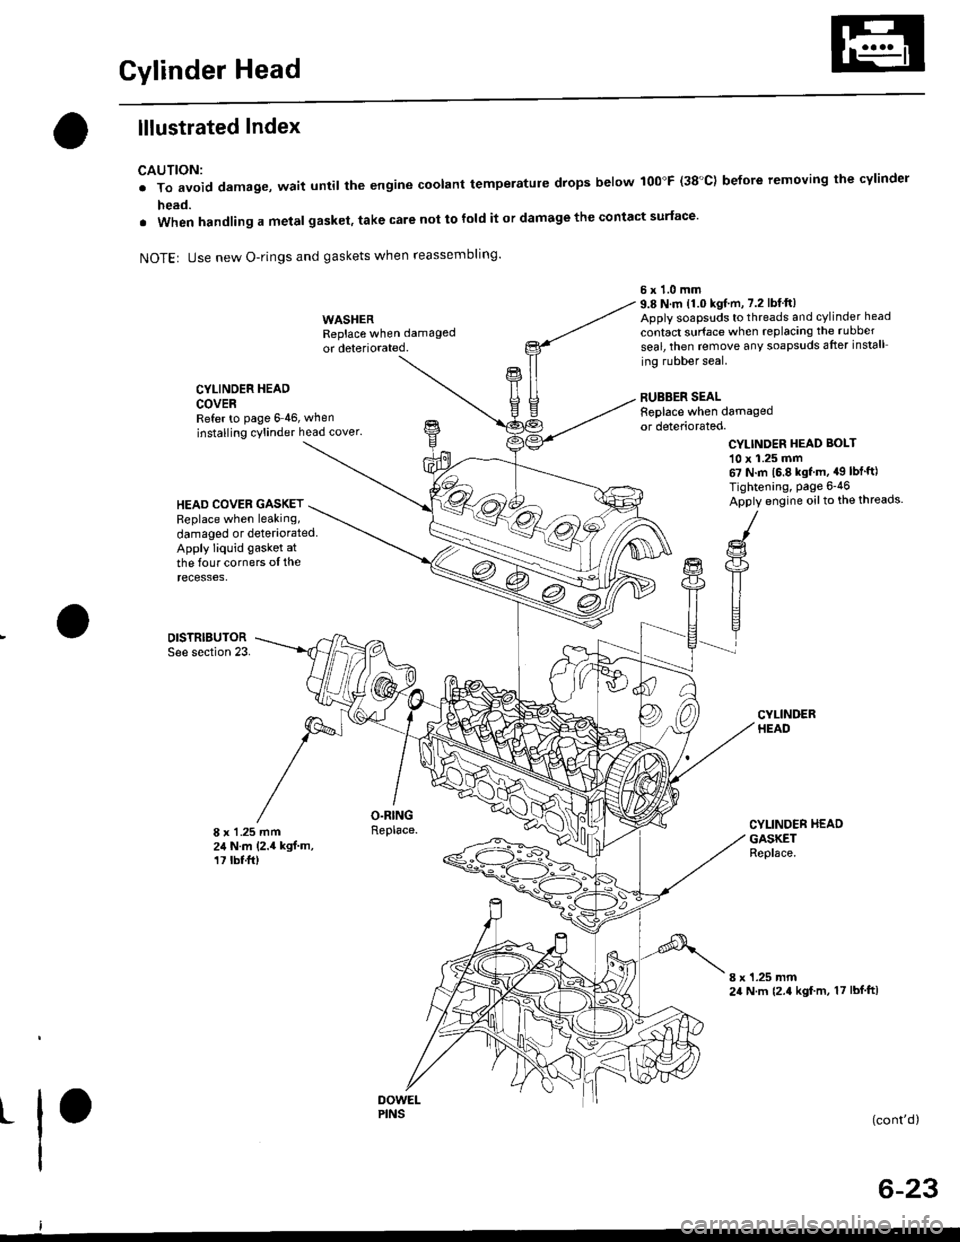 HONDA CIVIC 2000 6.G Owners Manual Gylinder Head
lllustrated Index
CAUTION:
. To avoid damage, wait until the engine coolant temperatule drops below 100"F (38C) before removing the cylinder
head.
. When handling a metal gasket, take c